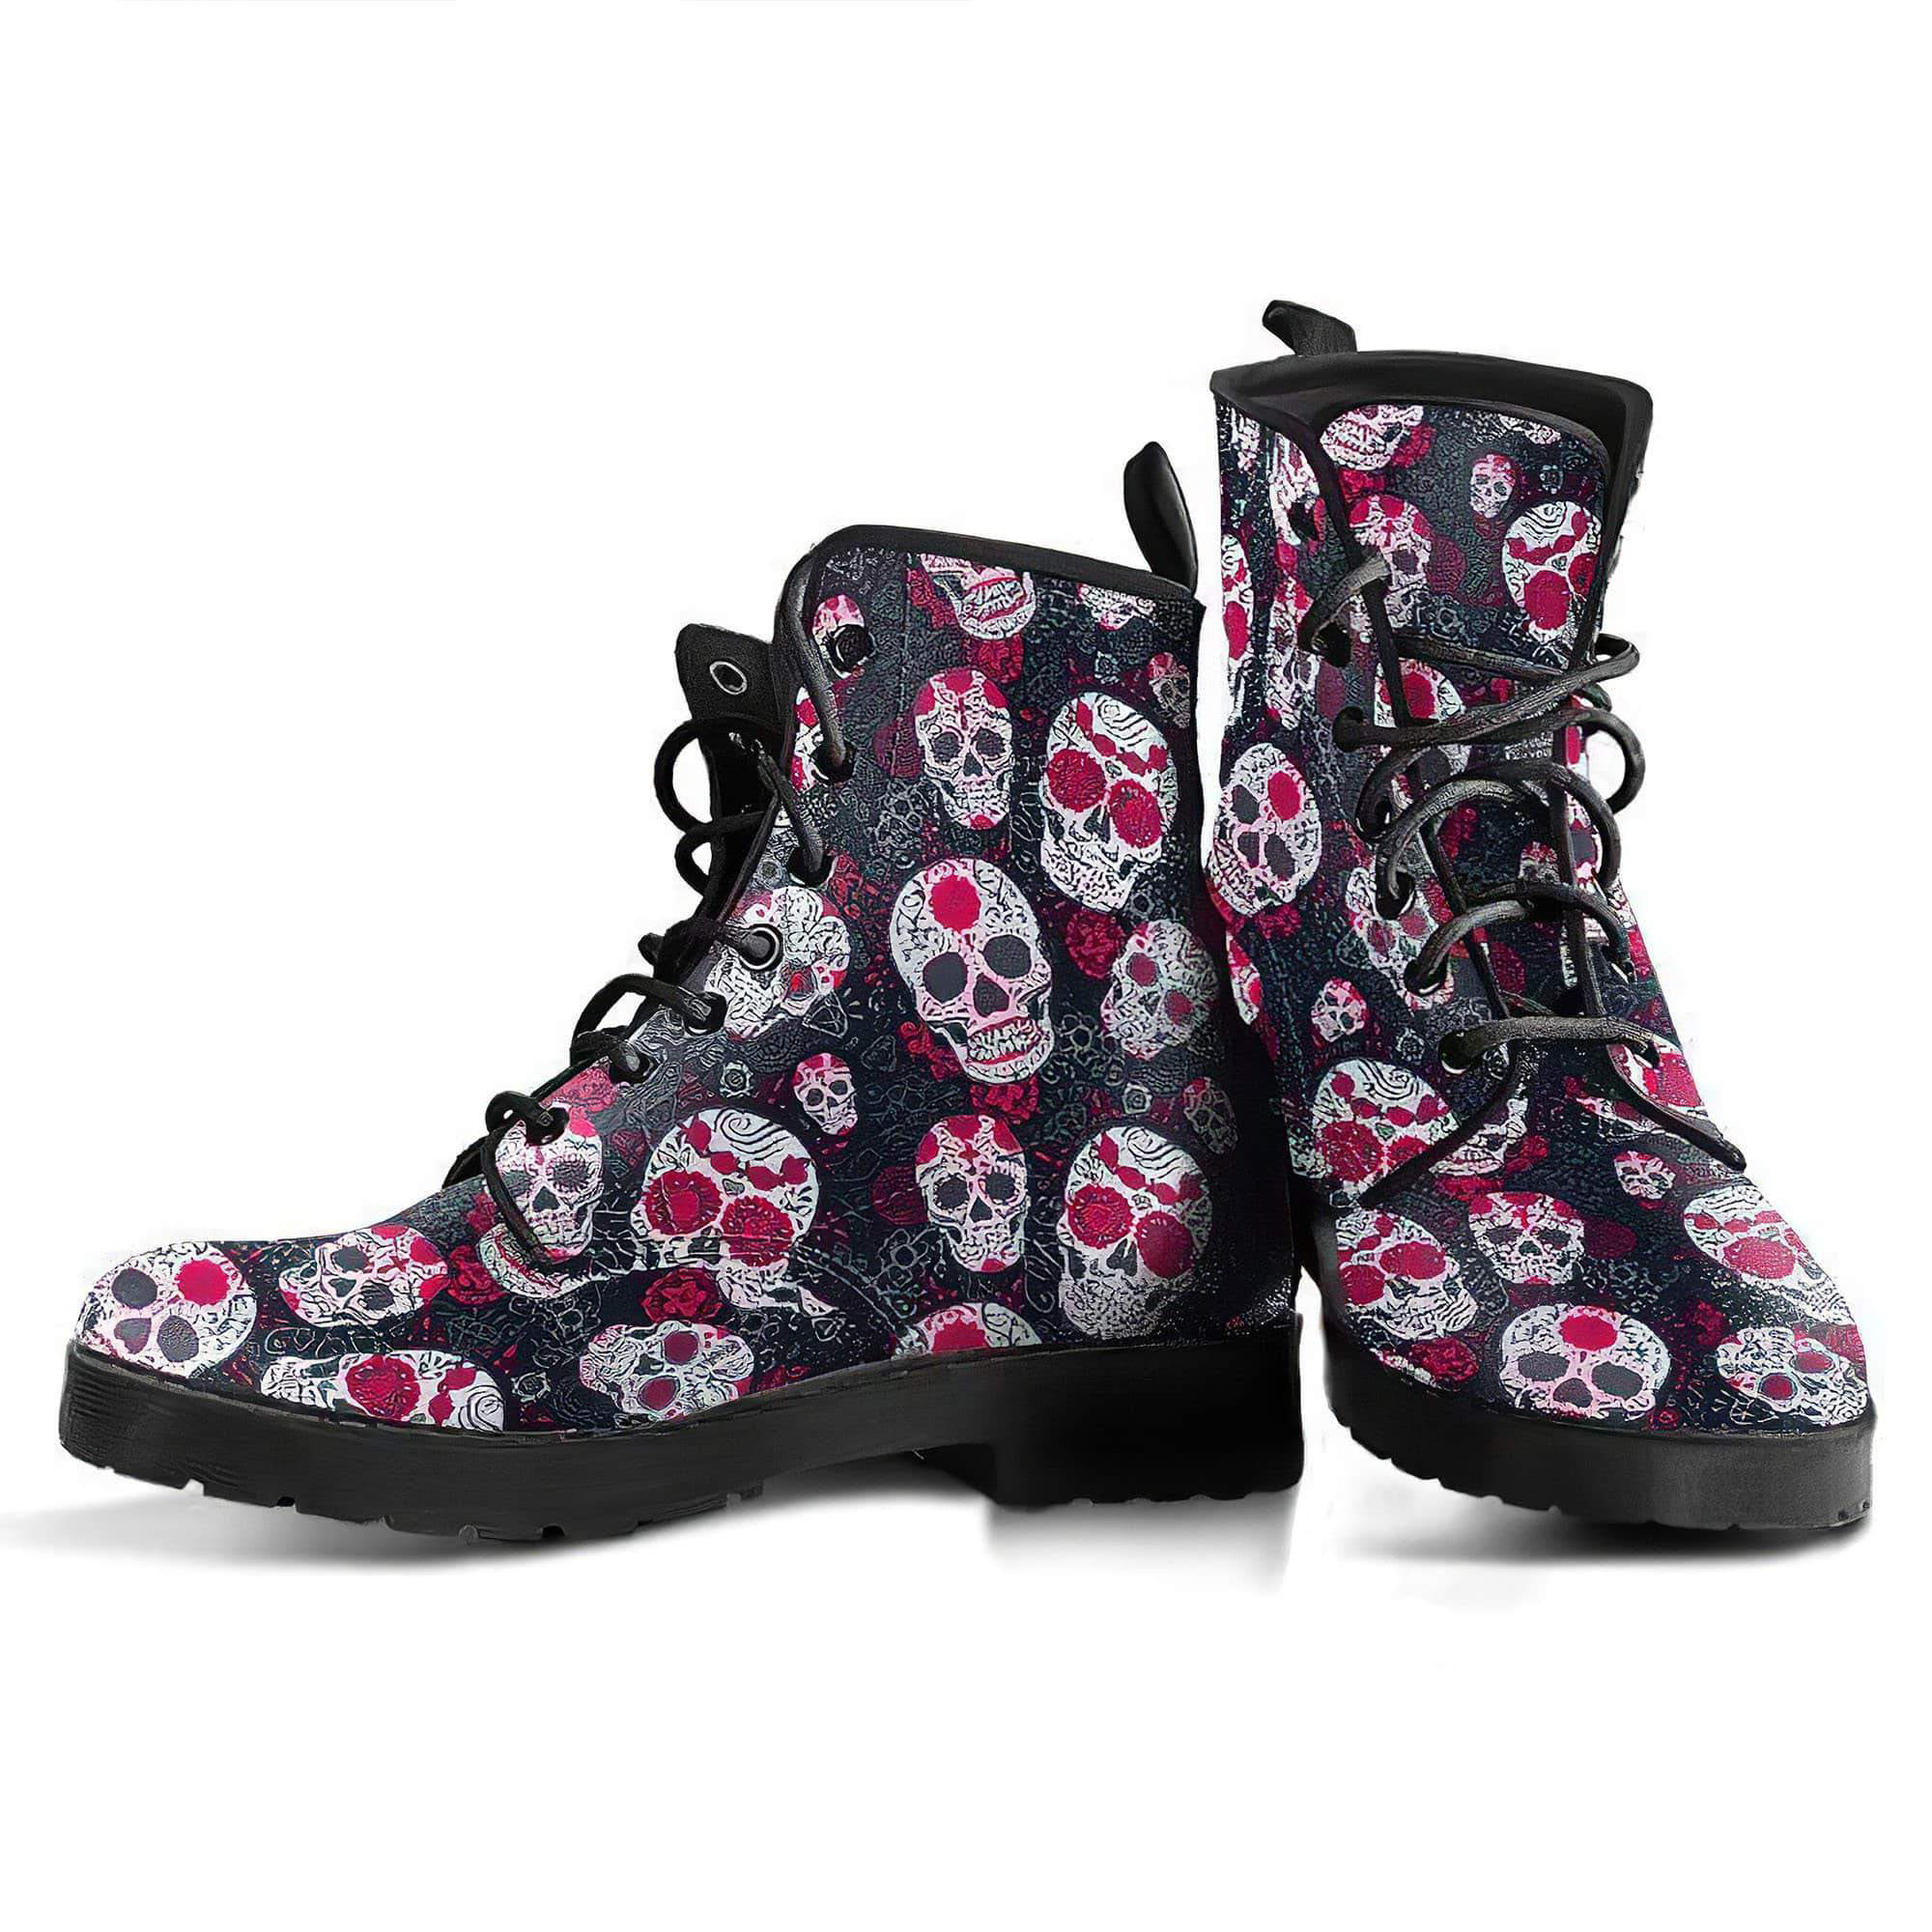 red-gray-sugar-skull-women-s-boots-vegan-friendly-leather-women-s-leather-boots-12051943325757.jpg